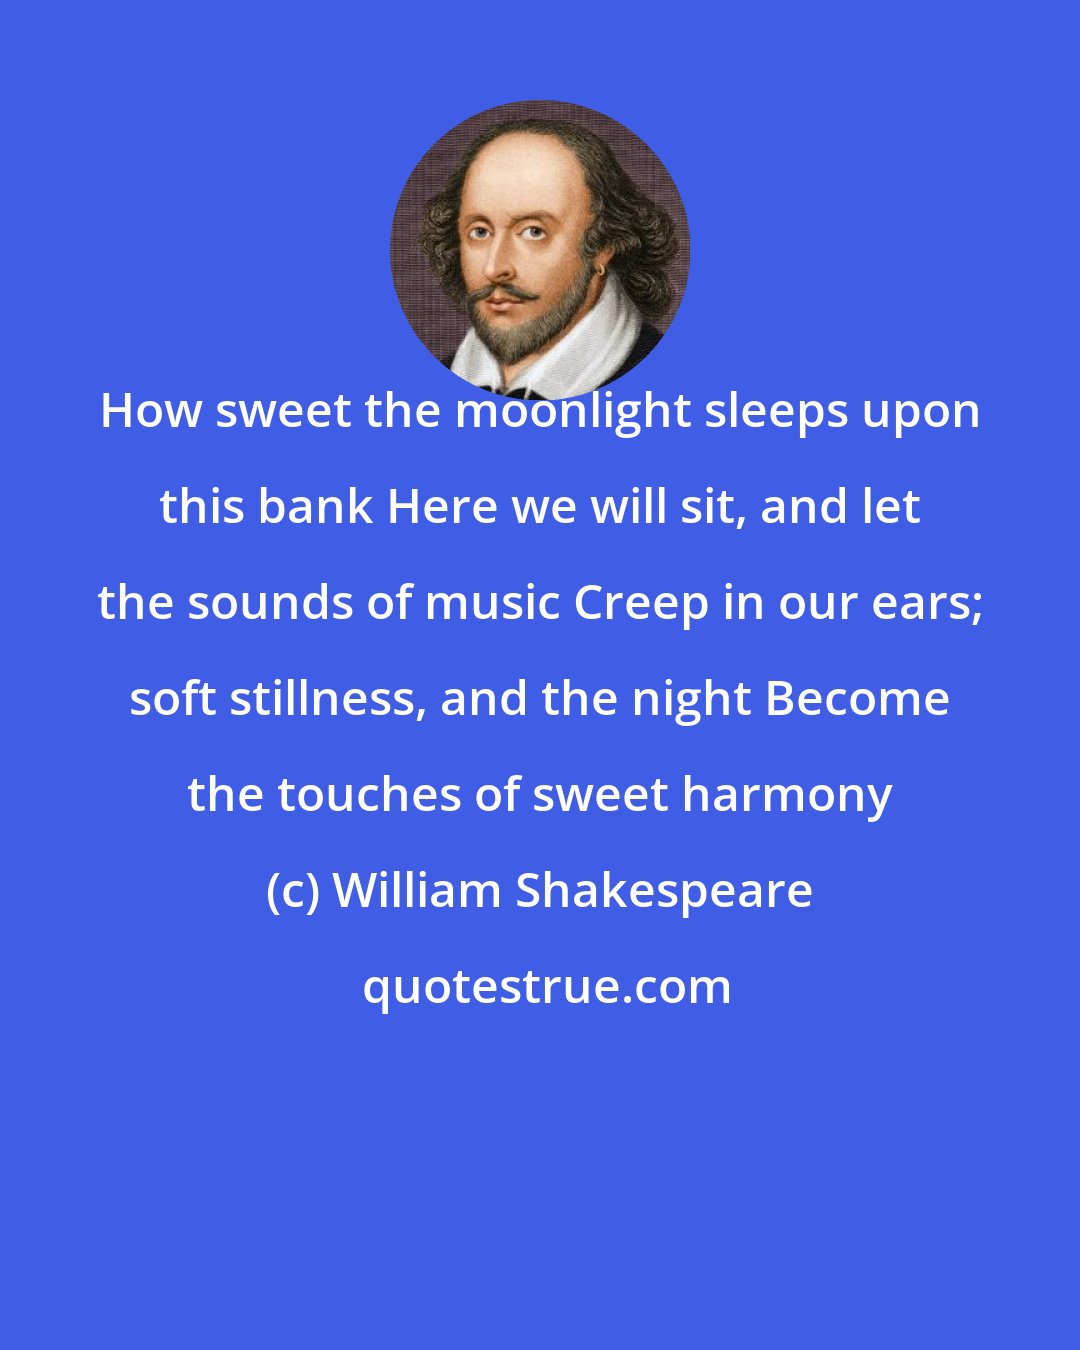 William Shakespeare: How sweet the moonlight sleeps upon this bank Here we will sit, and let the sounds of music Creep in our ears; soft stillness, and the night Become the touches of sweet harmony